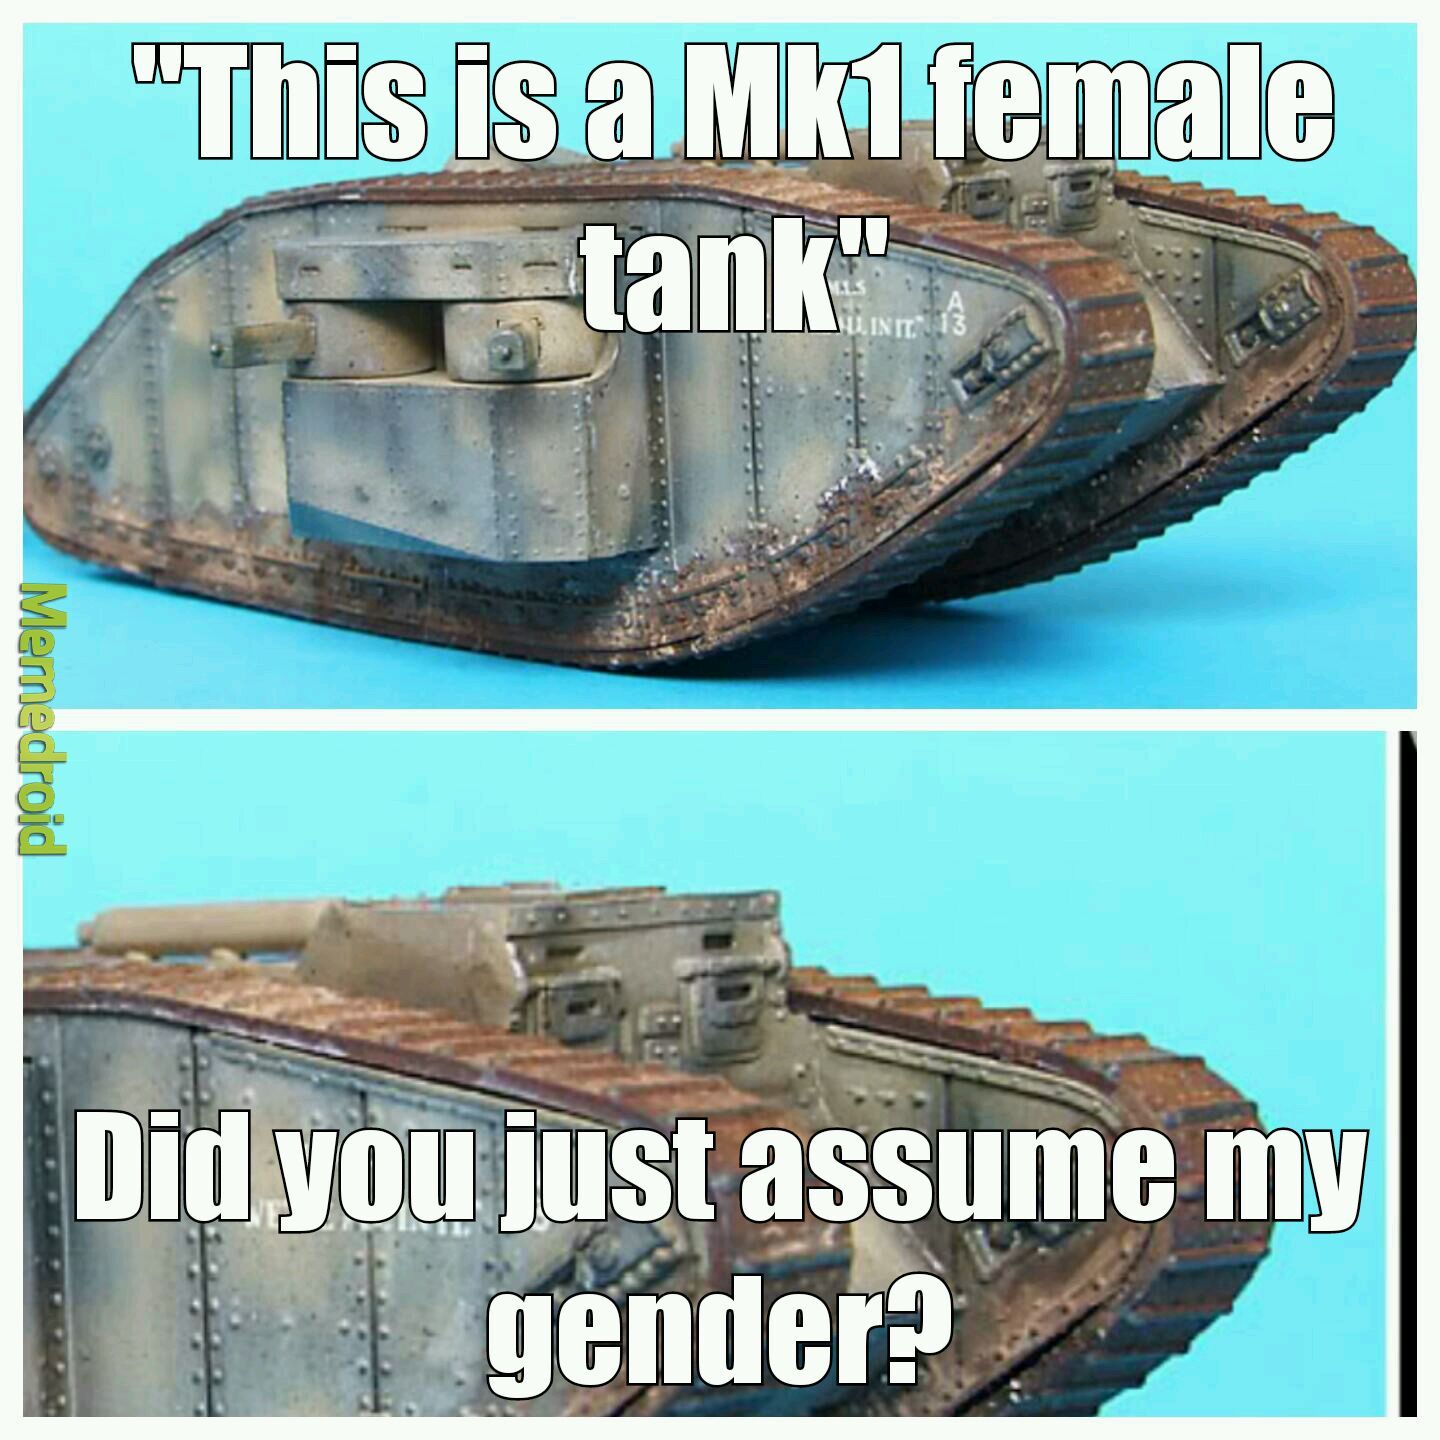 Males had cannons not MGs - meme